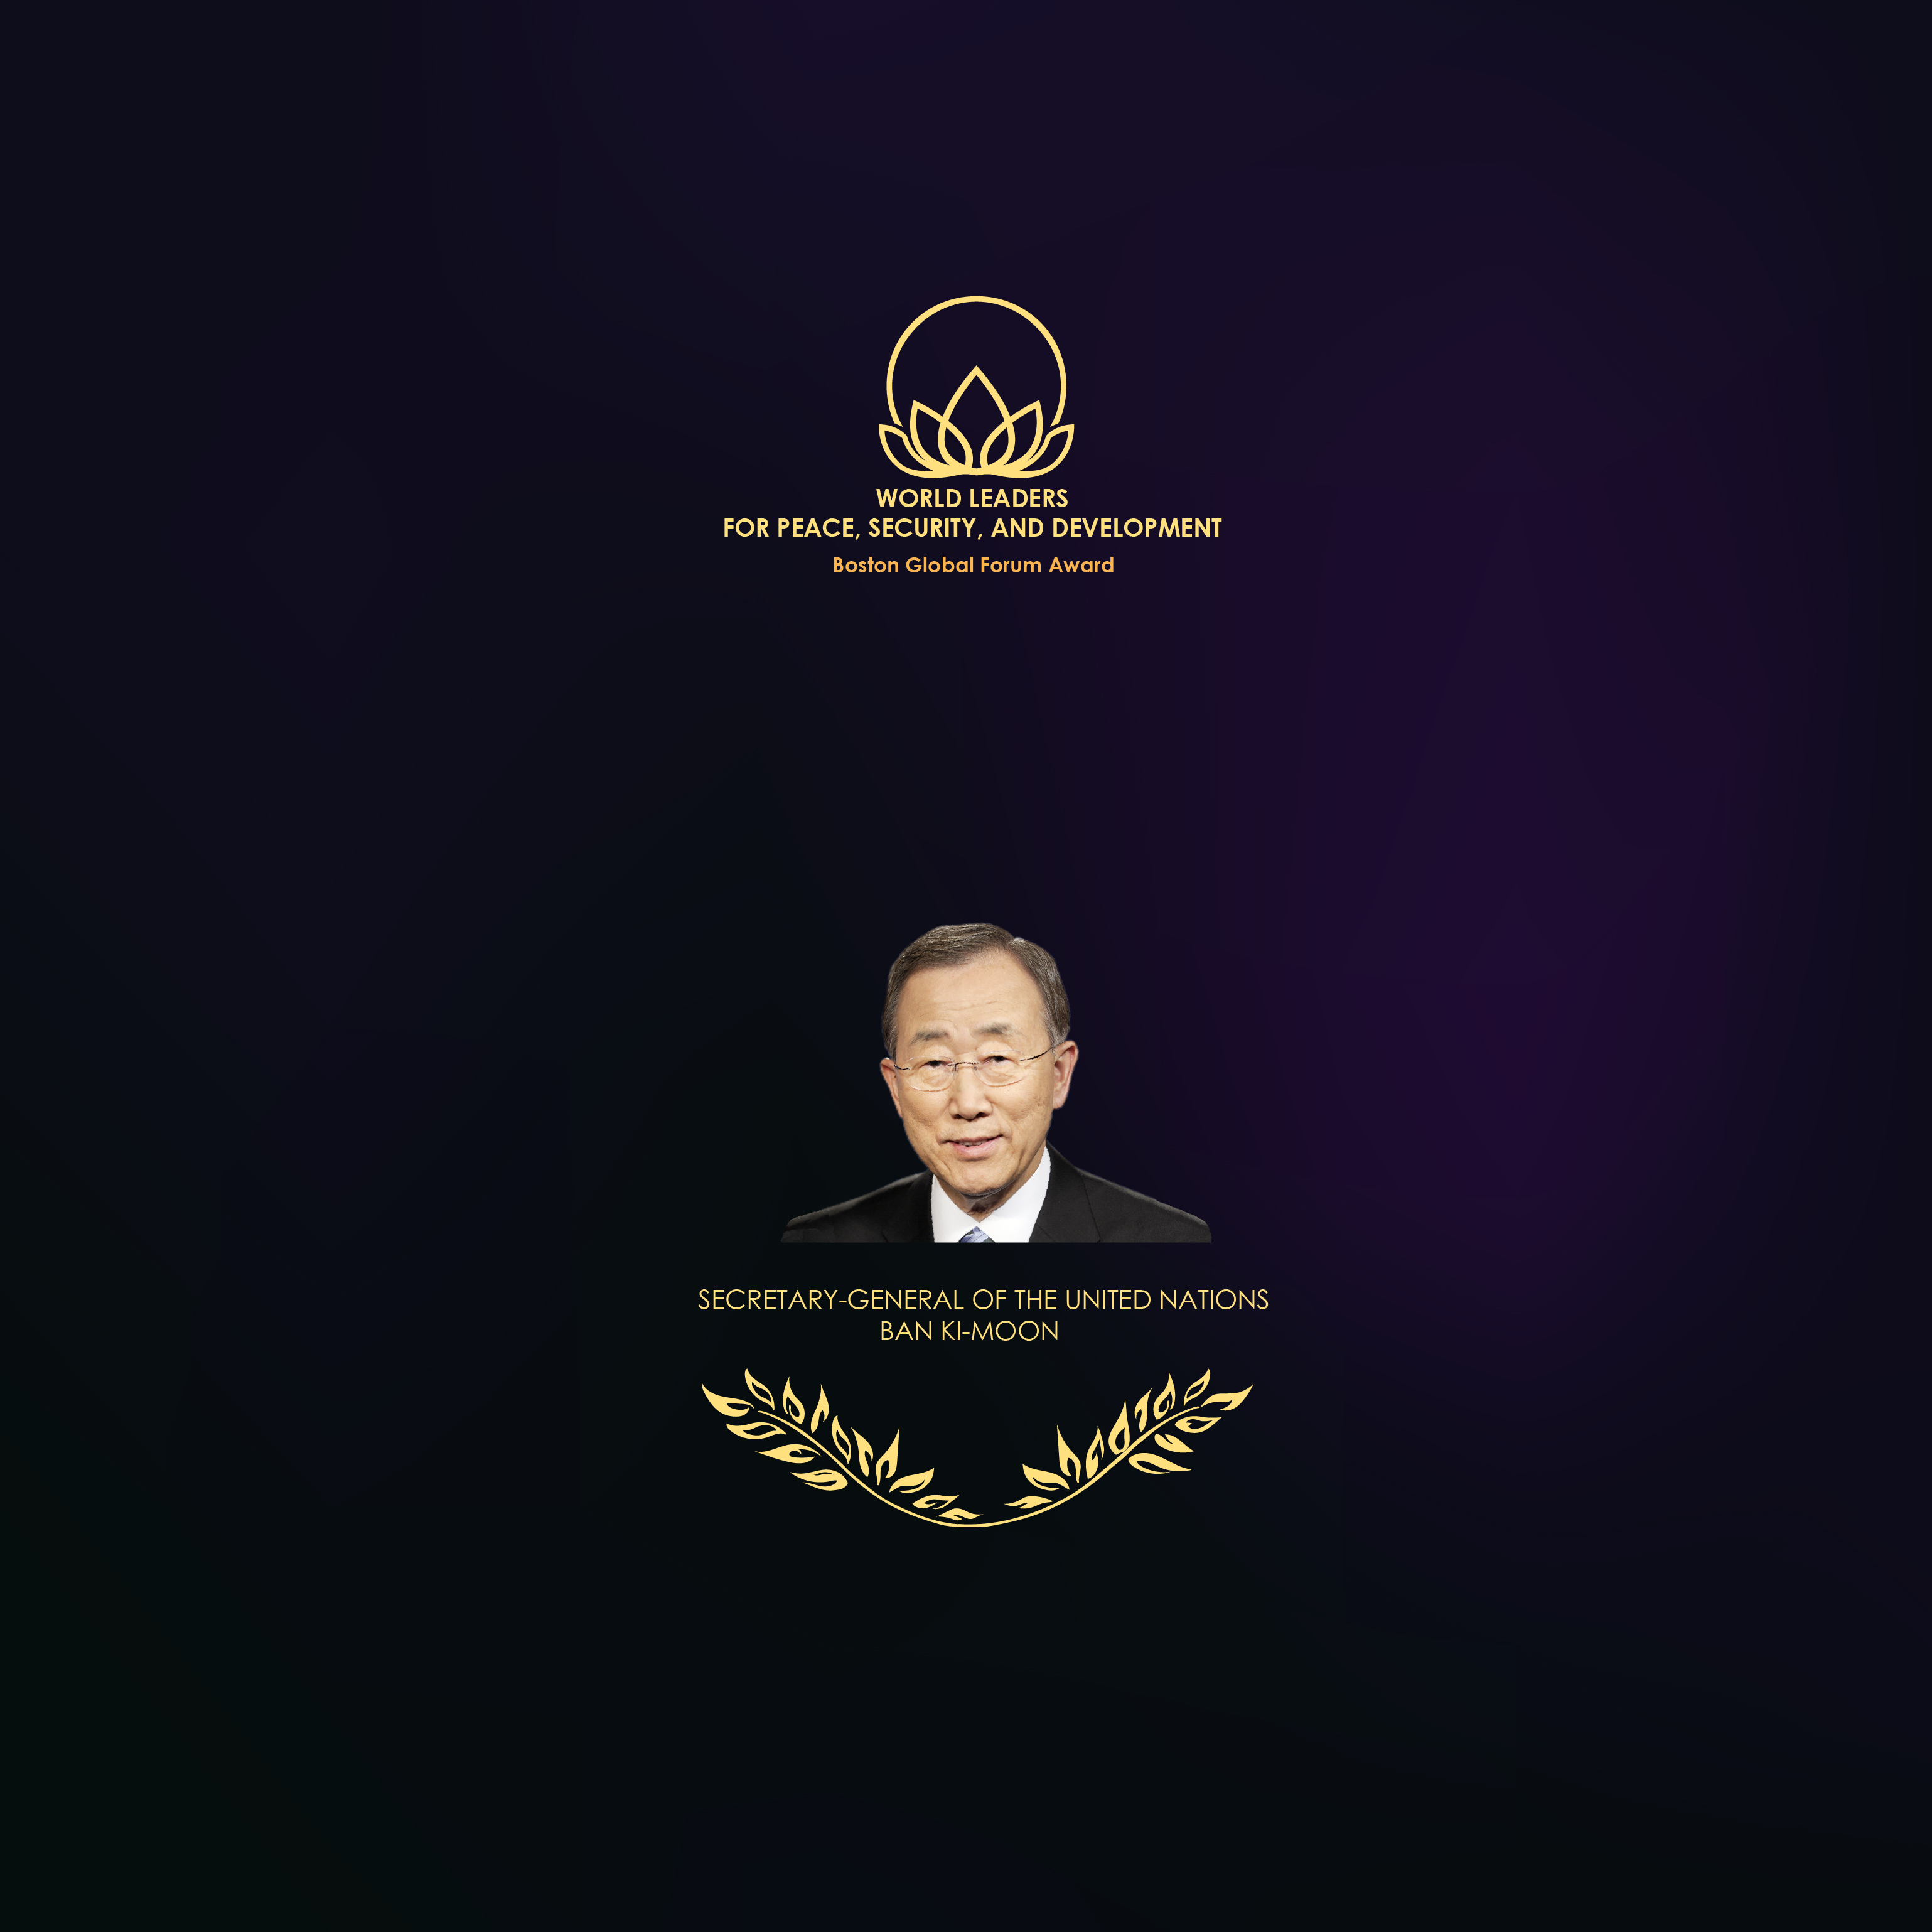 Acceptance Message from The Secretary-General Ban Ki-Moon